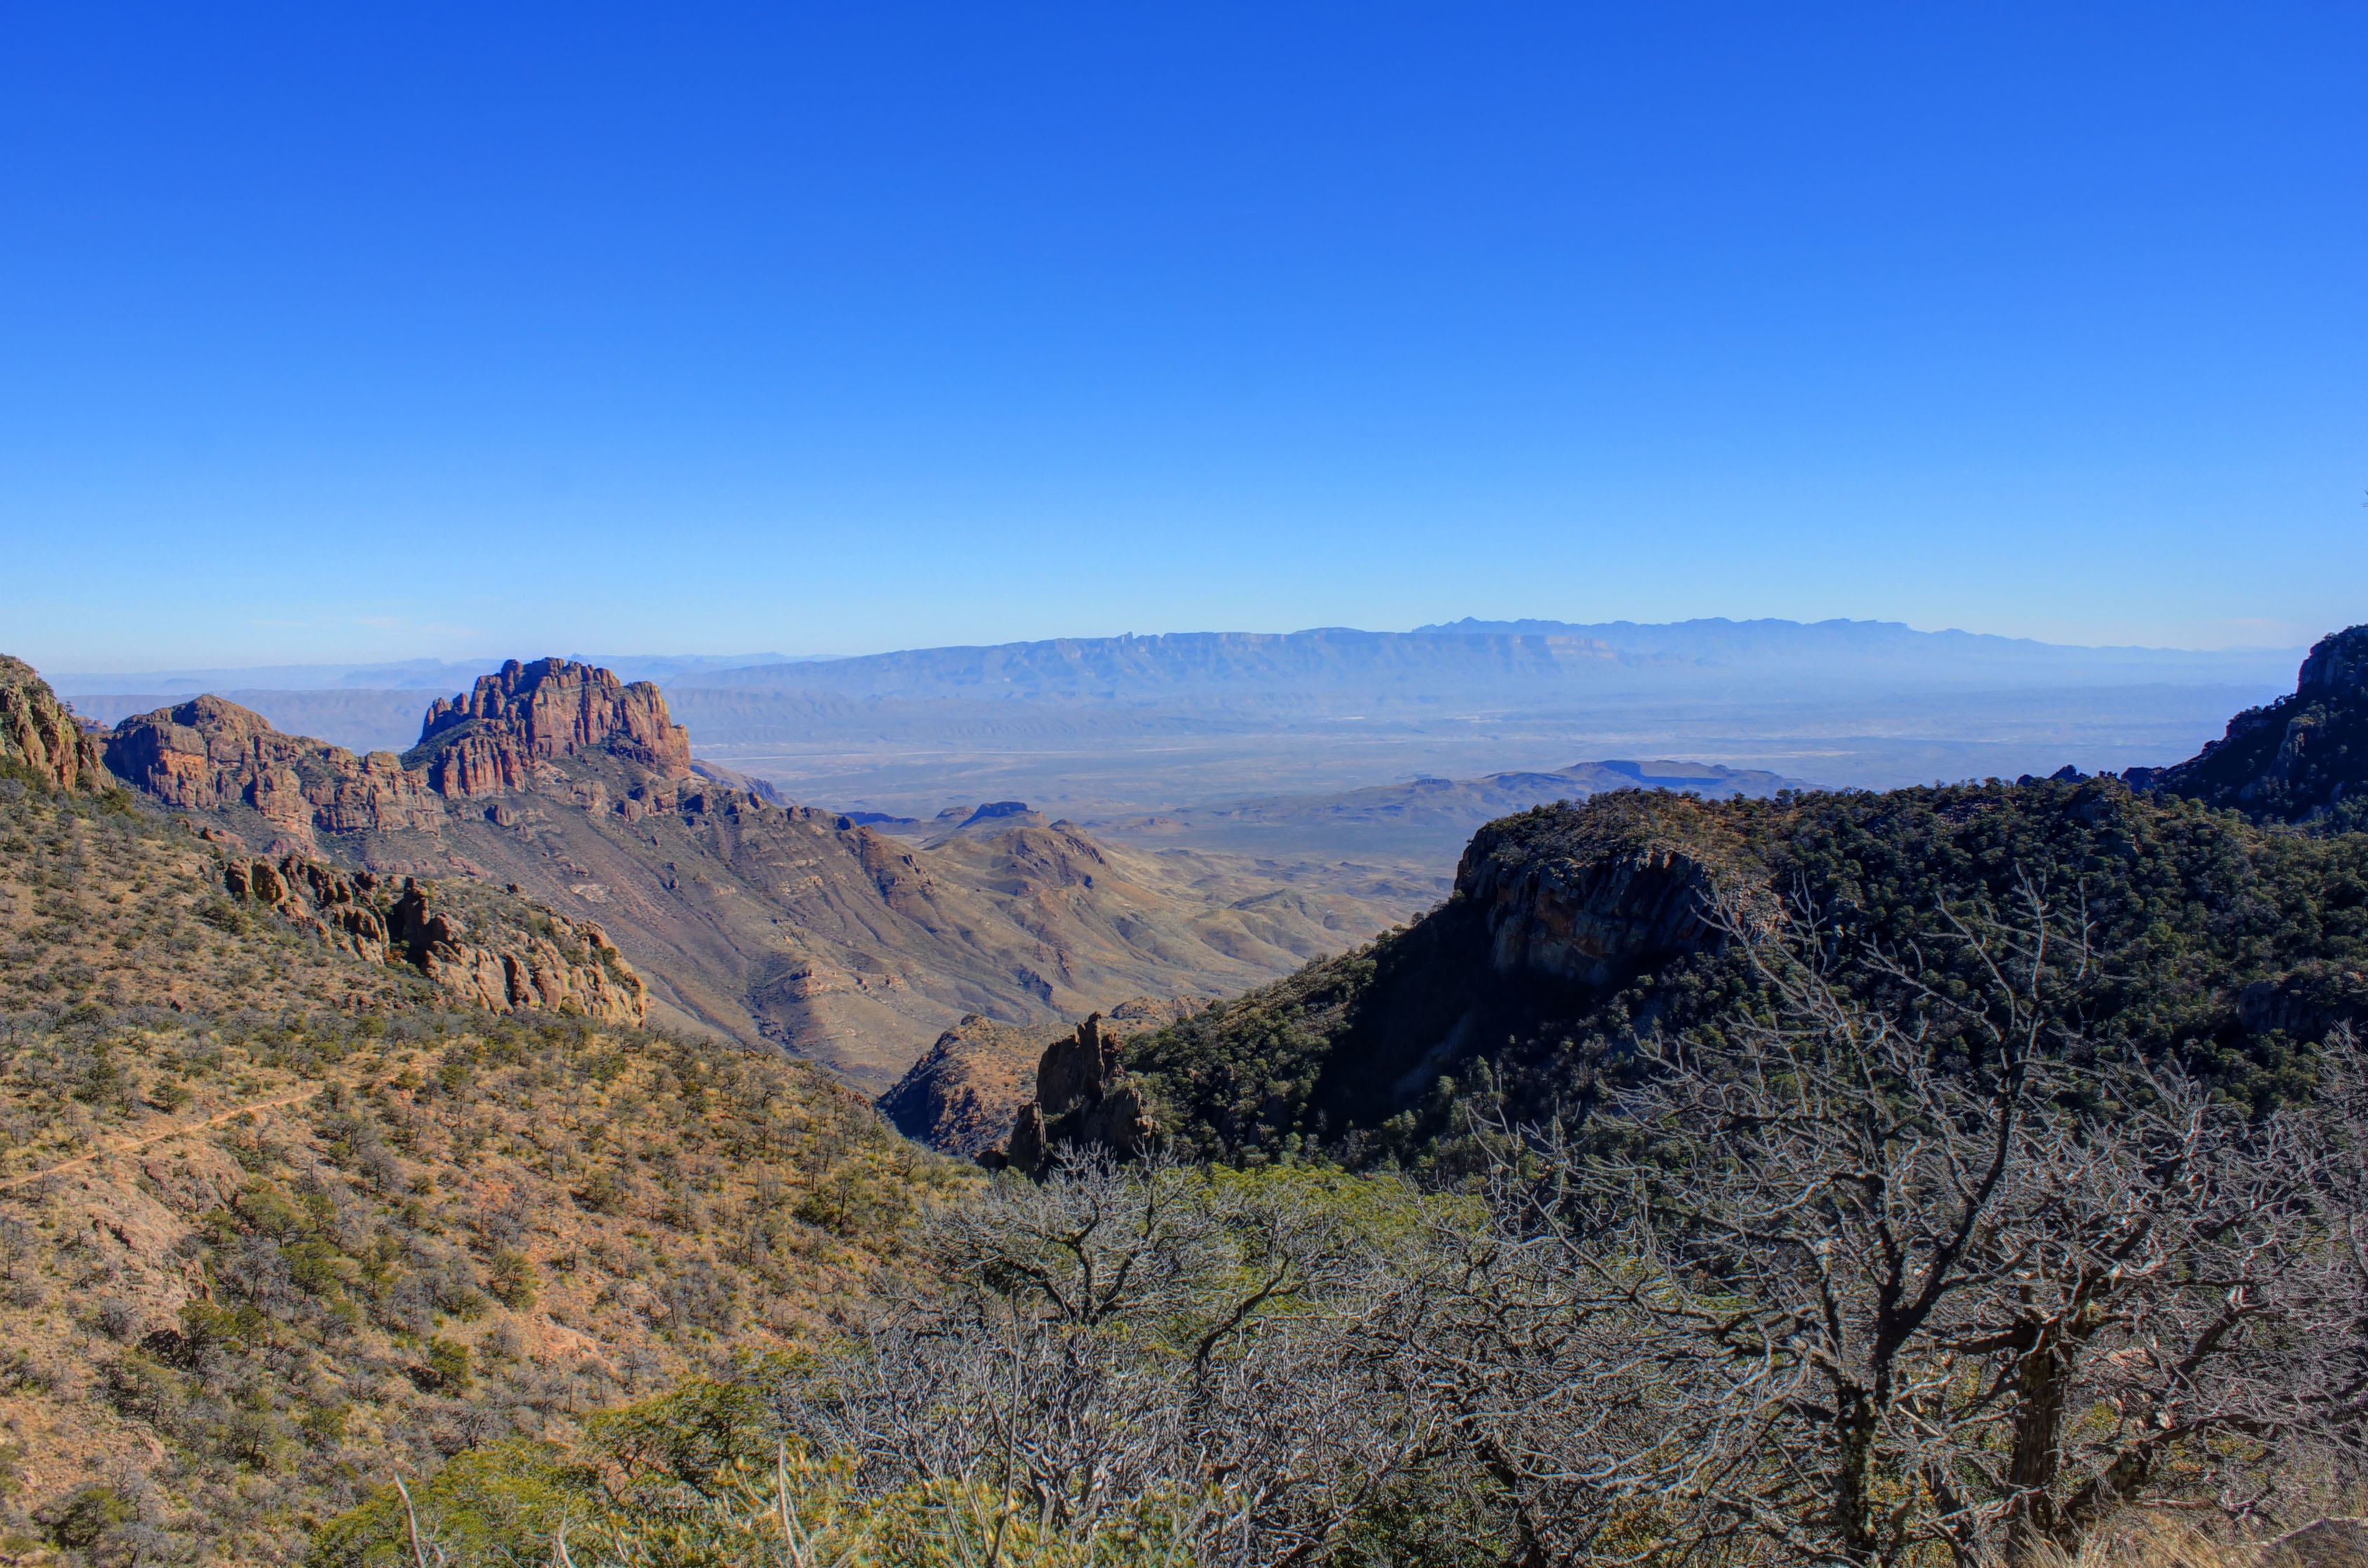 Mountains and Sky at Big Bend National Park, Texas image - Free stock ...